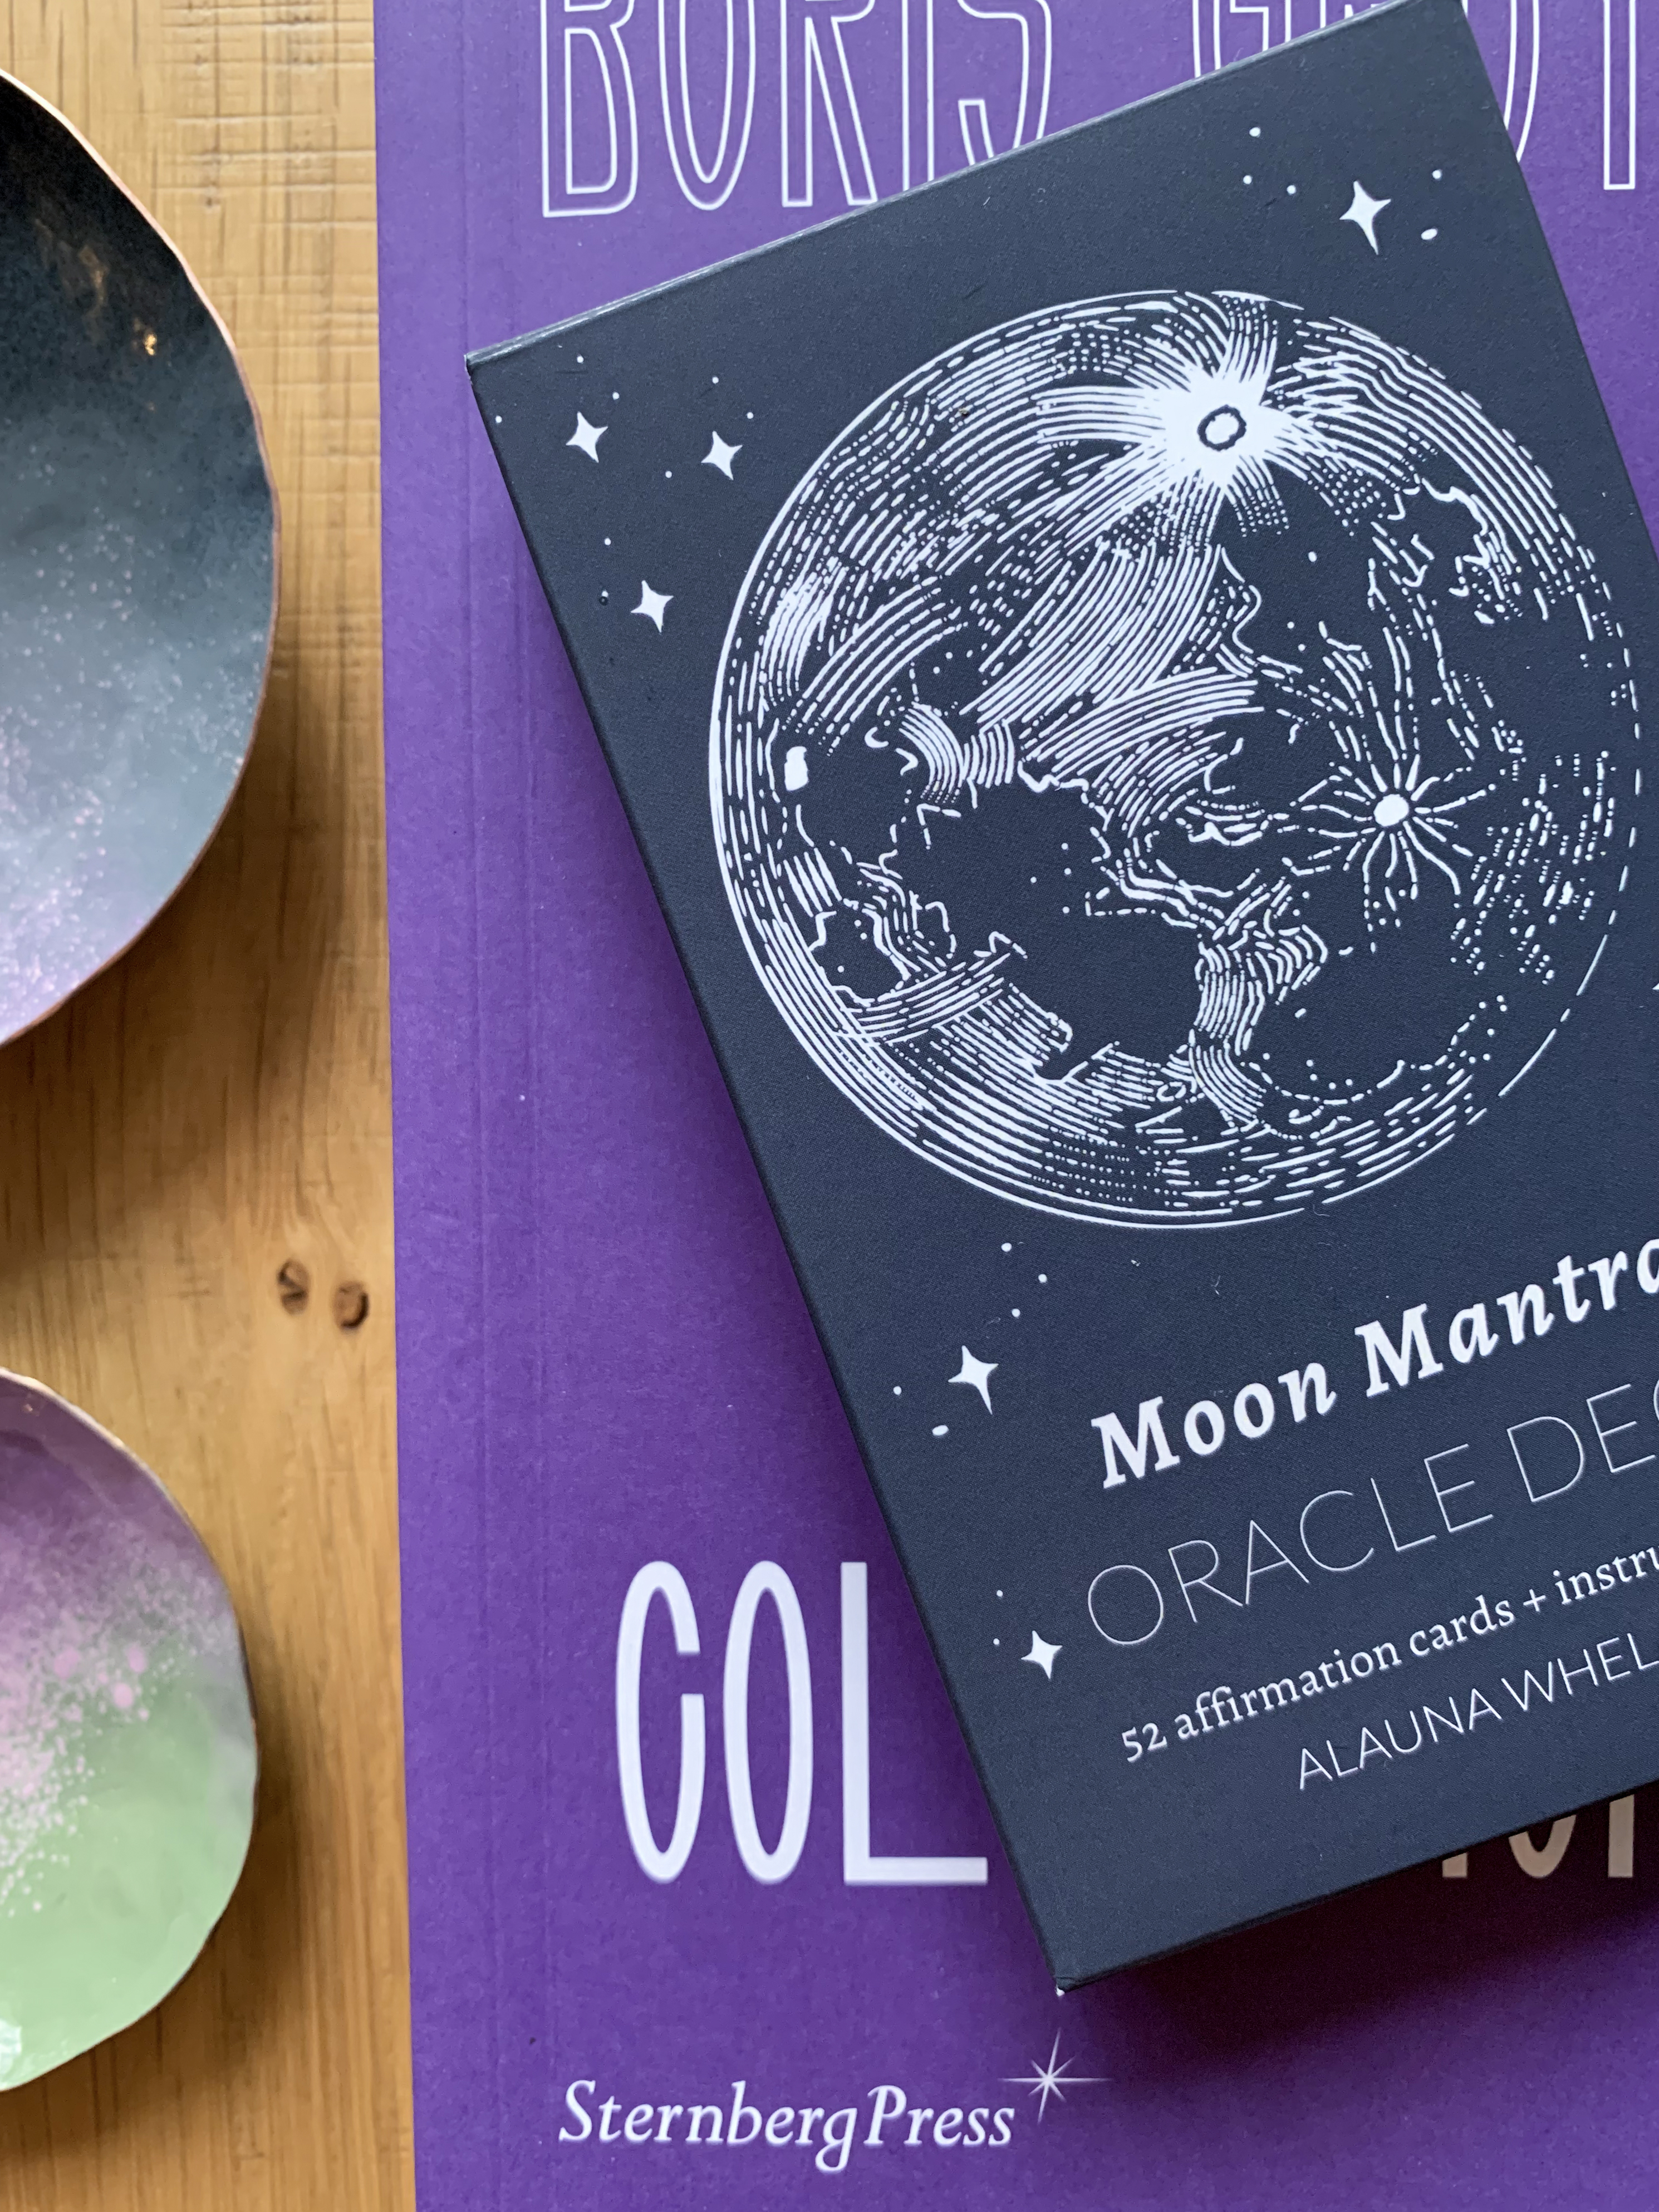 moon mantra oracle deck, book, and colorful metal dishes